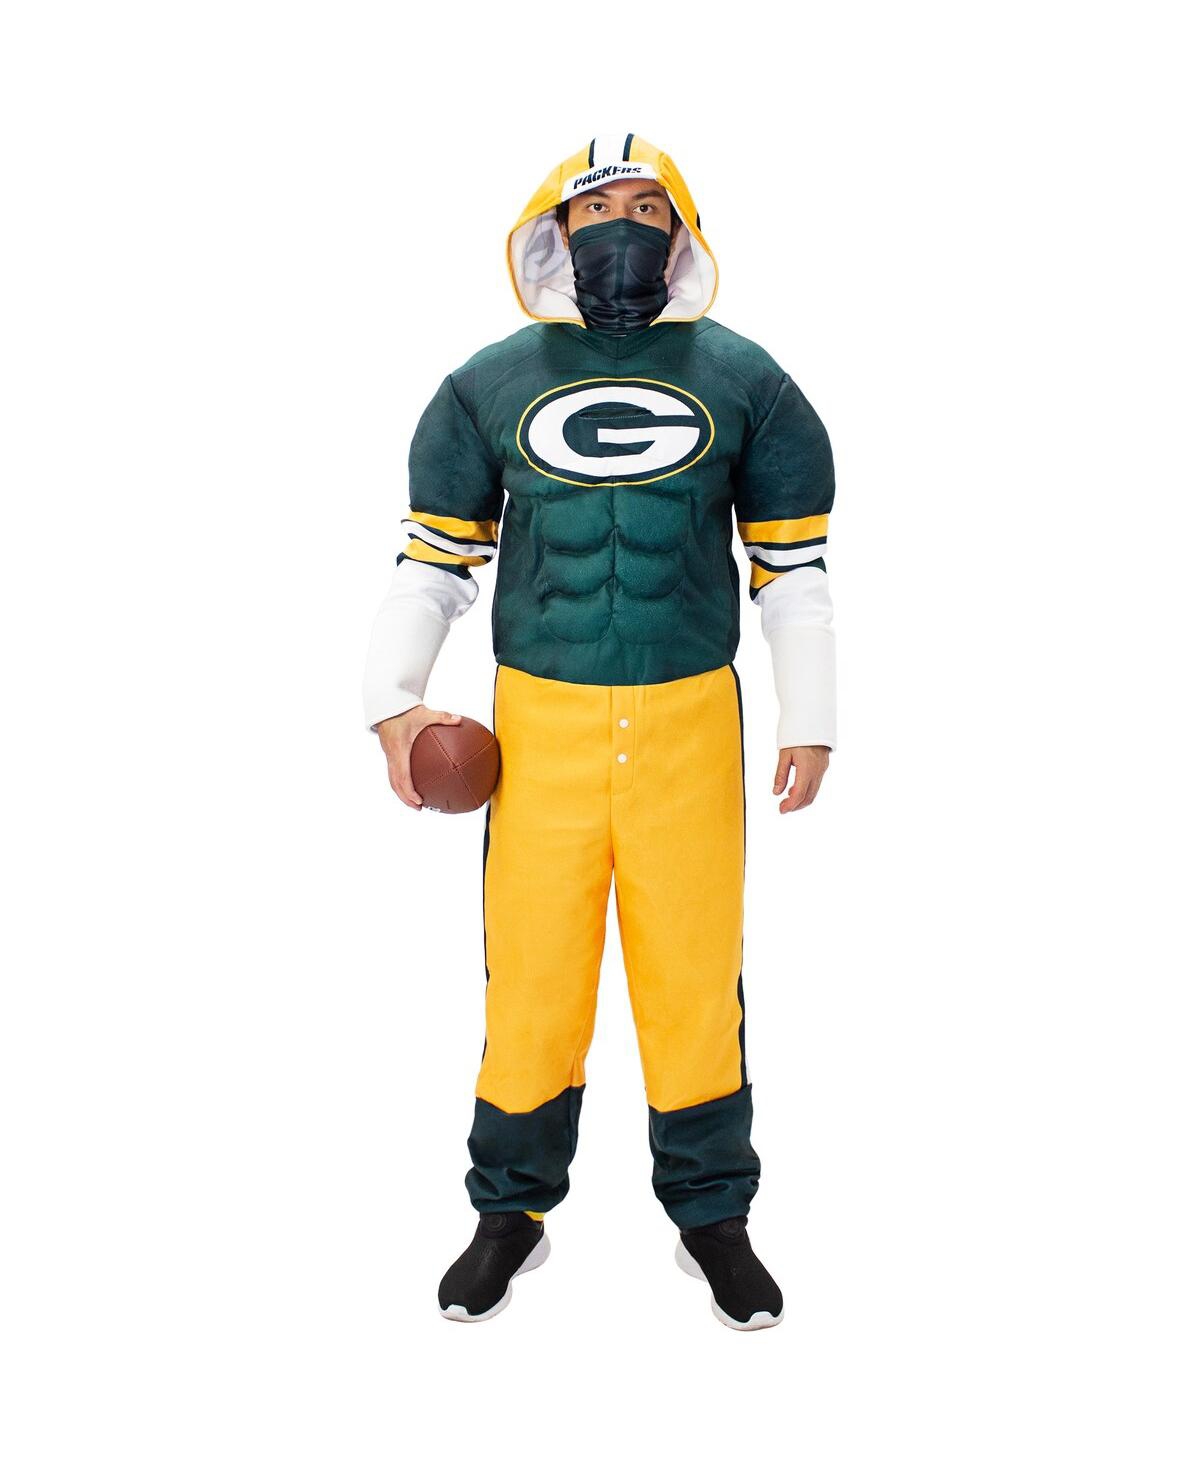 Men's Green Green Bay Packers Game Day Costume - Green